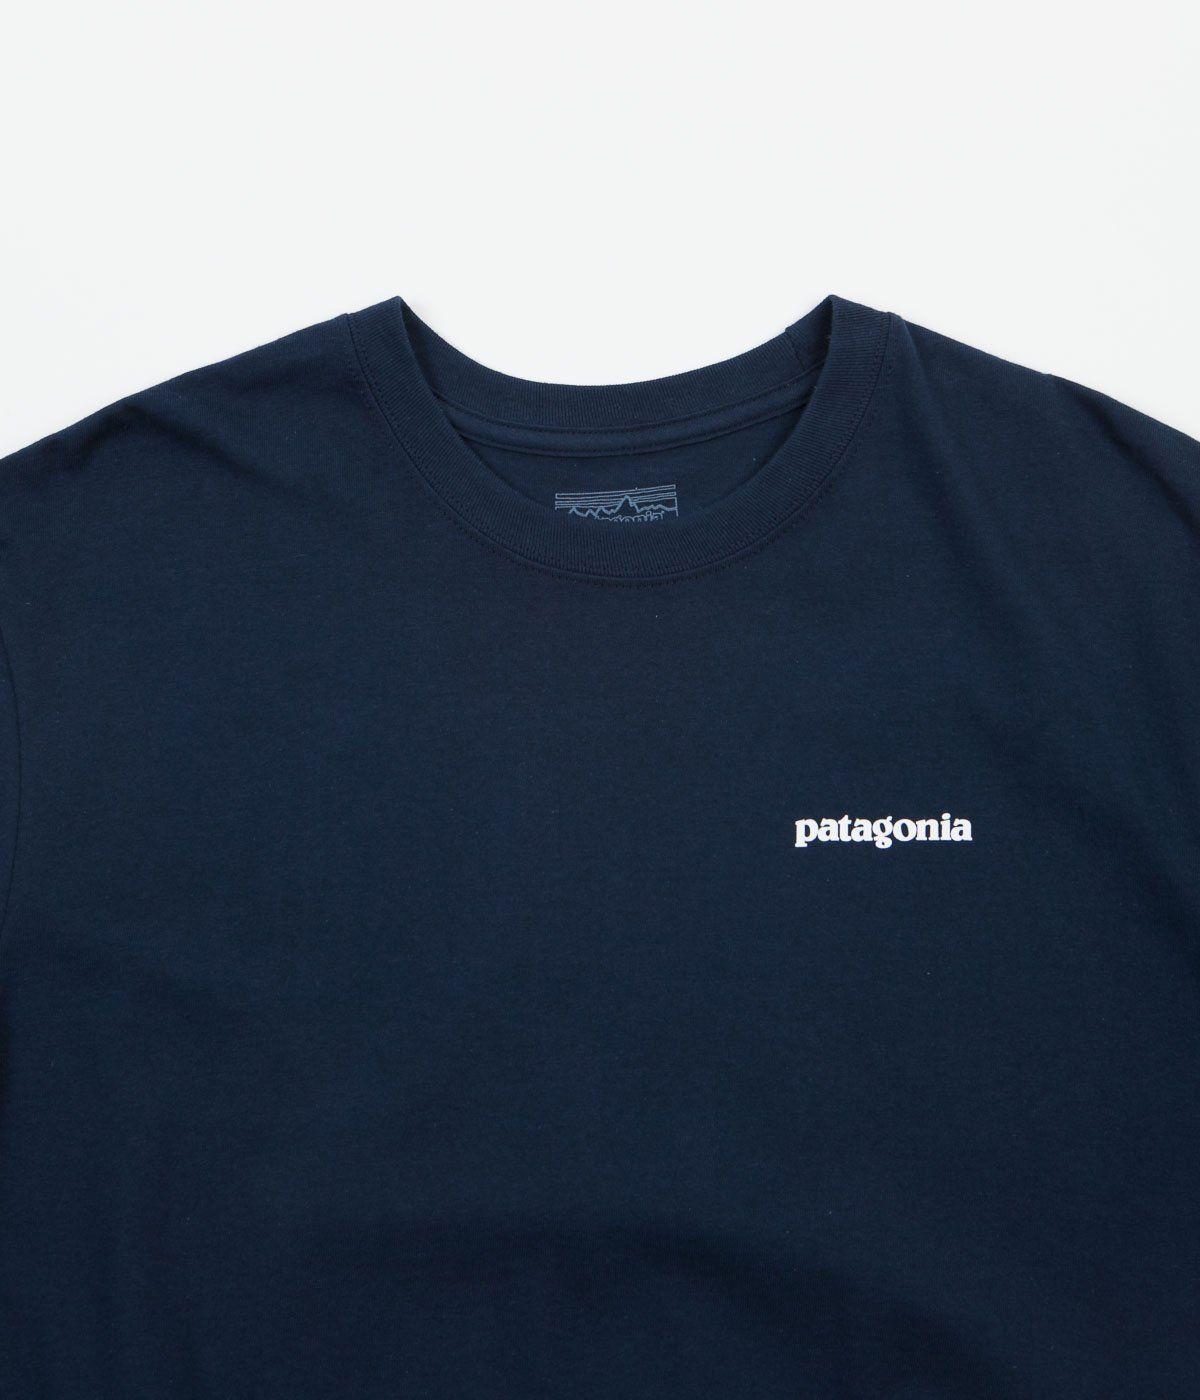 Grey and Navy Blue Logo - Patagonia P-6 Logo T-Shirt - Navy Blue | Always in Colour